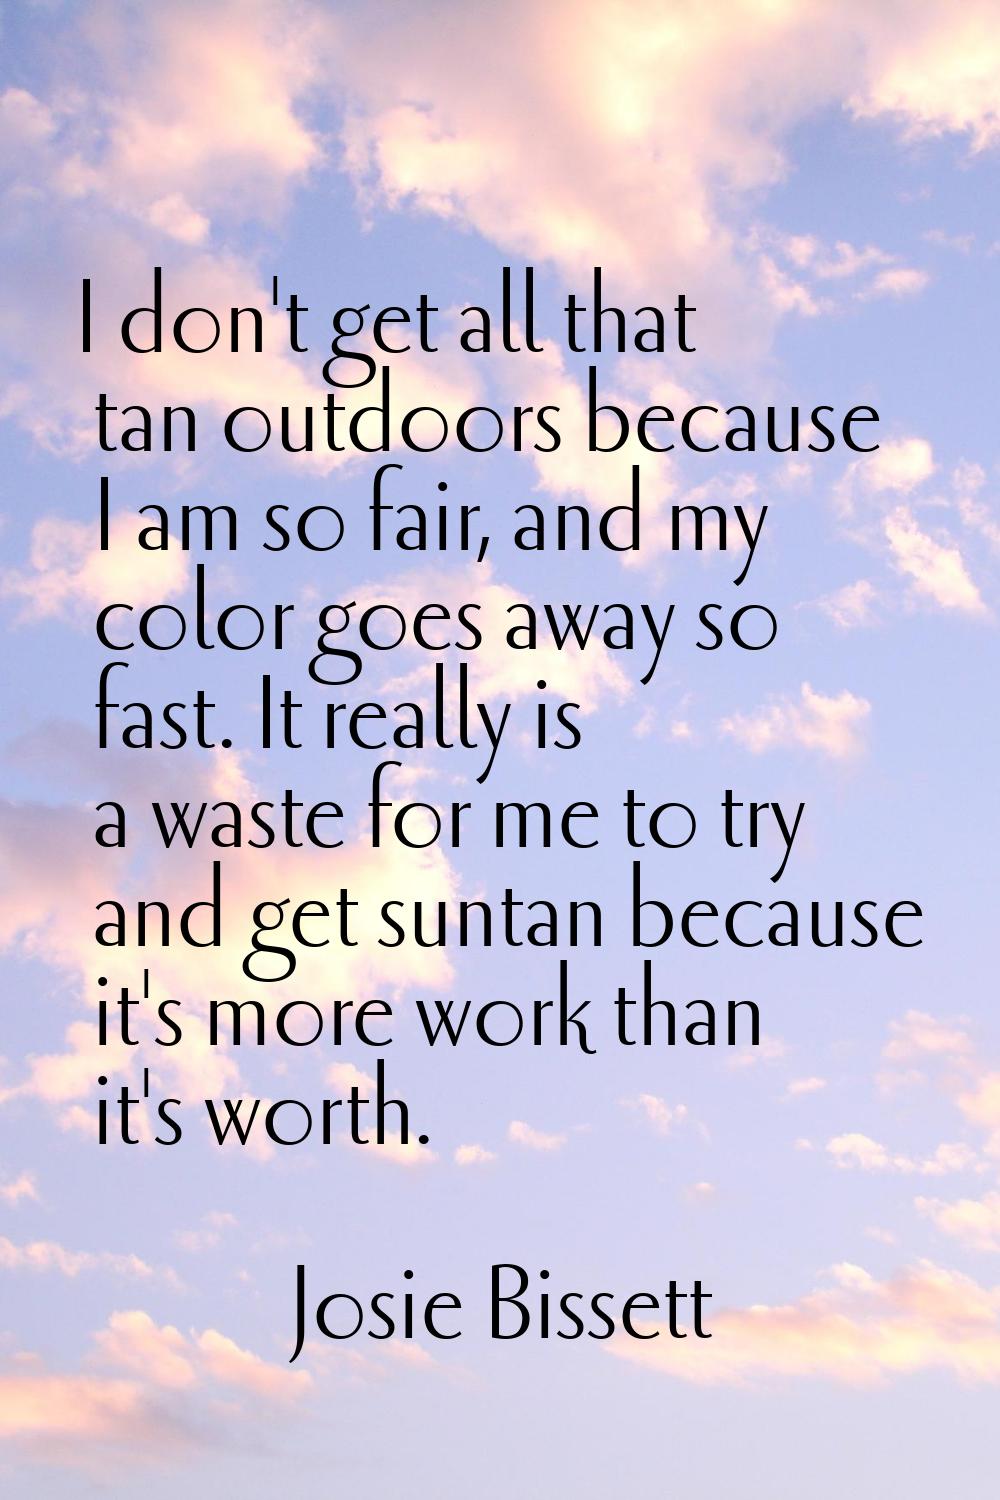 I don't get all that tan outdoors because I am so fair, and my color goes away so fast. It really i